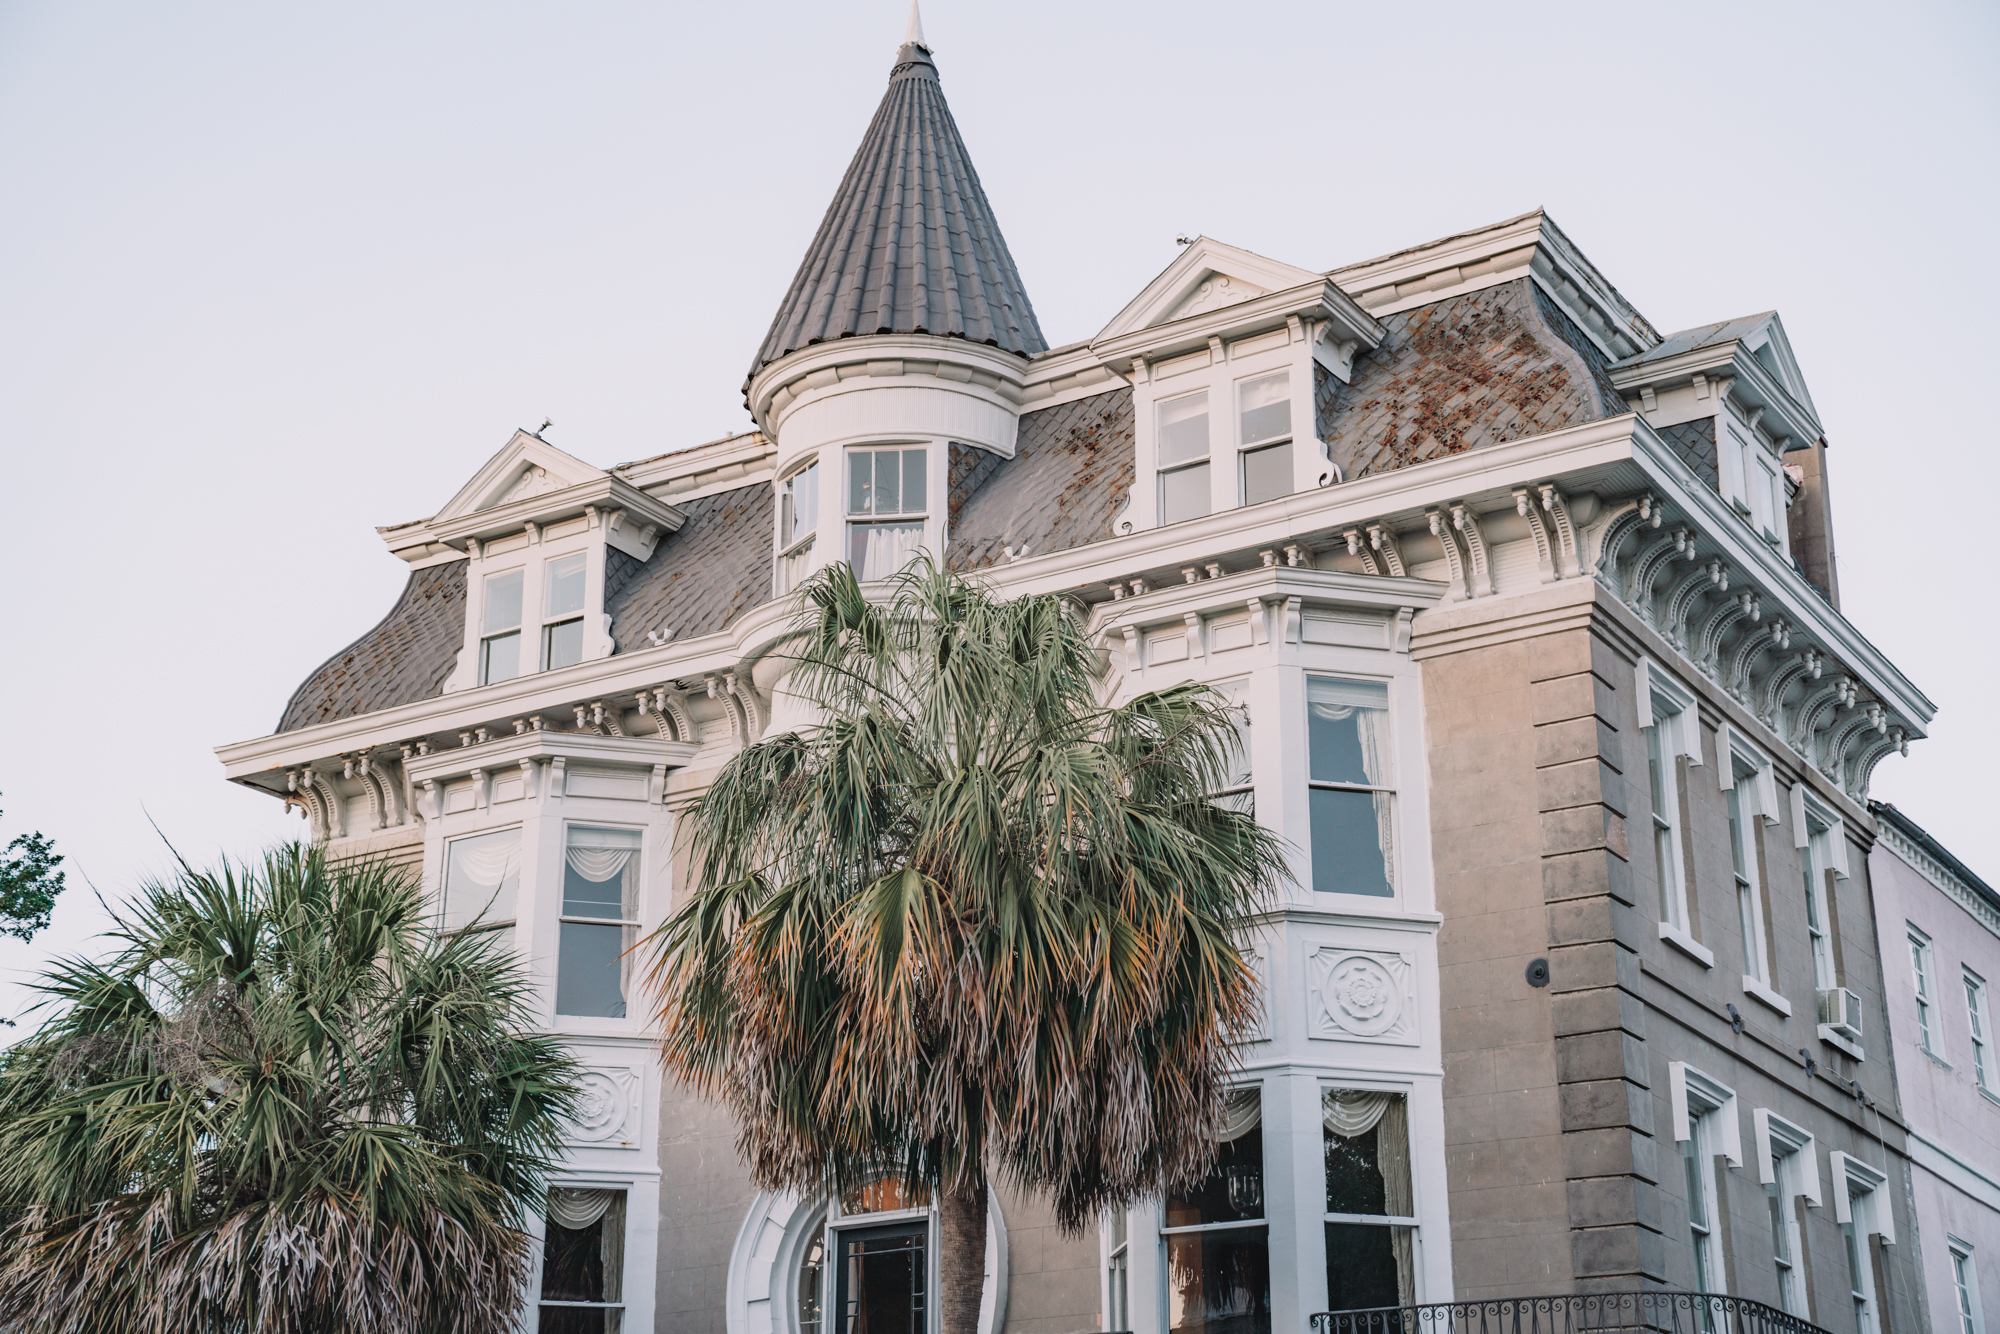 charleston sc visitors guide - a giant antebellum house with palmetto trees in front. 